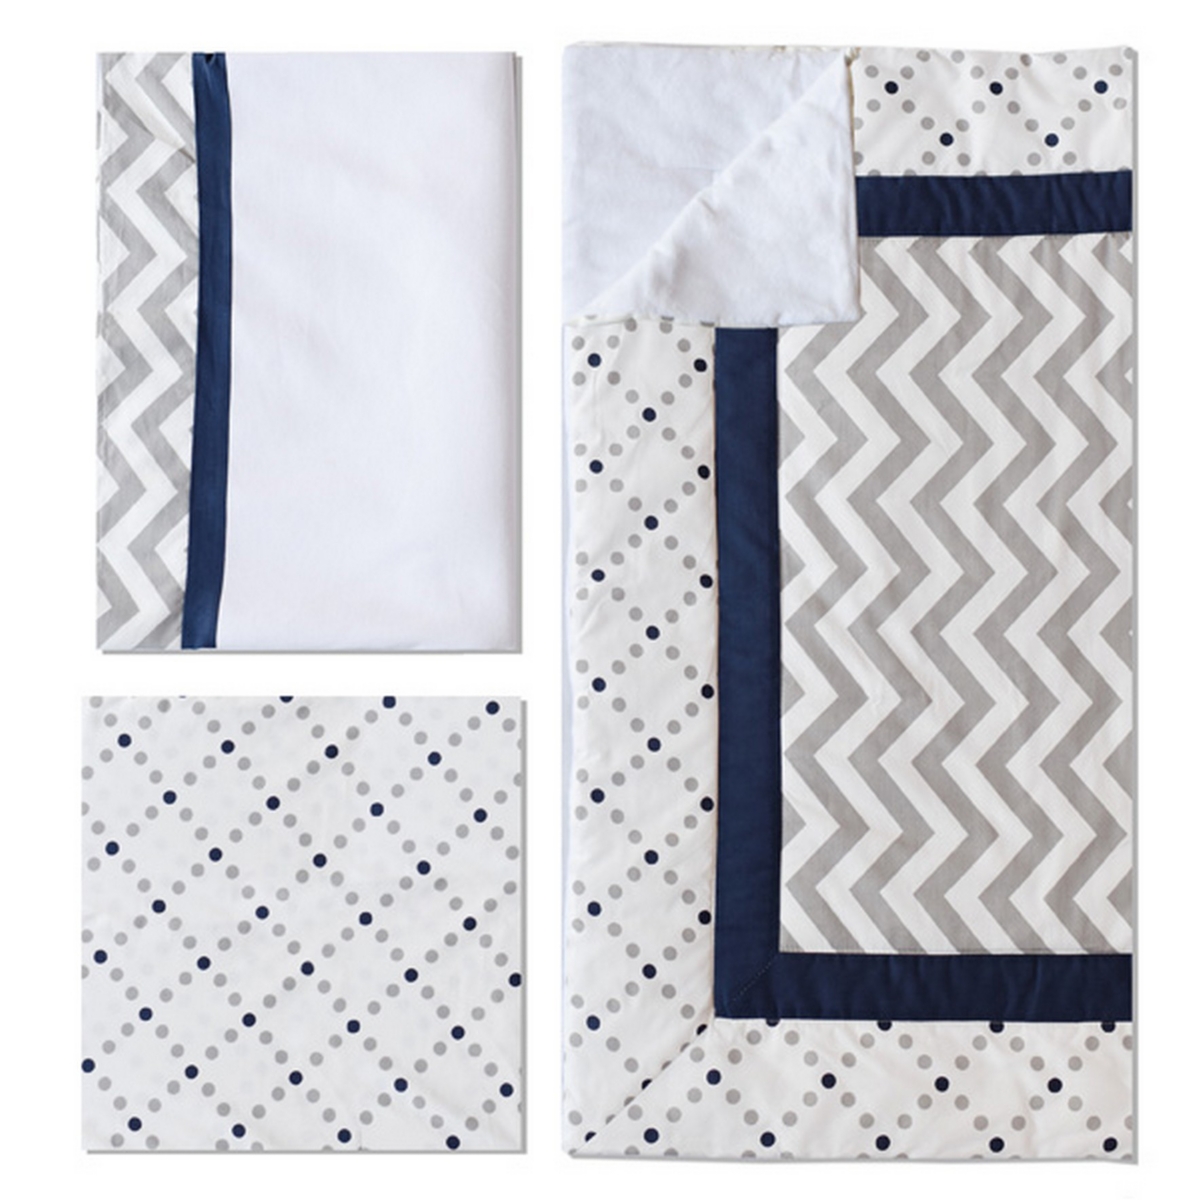 Out of the Blue 3pc Crib Set Bedding